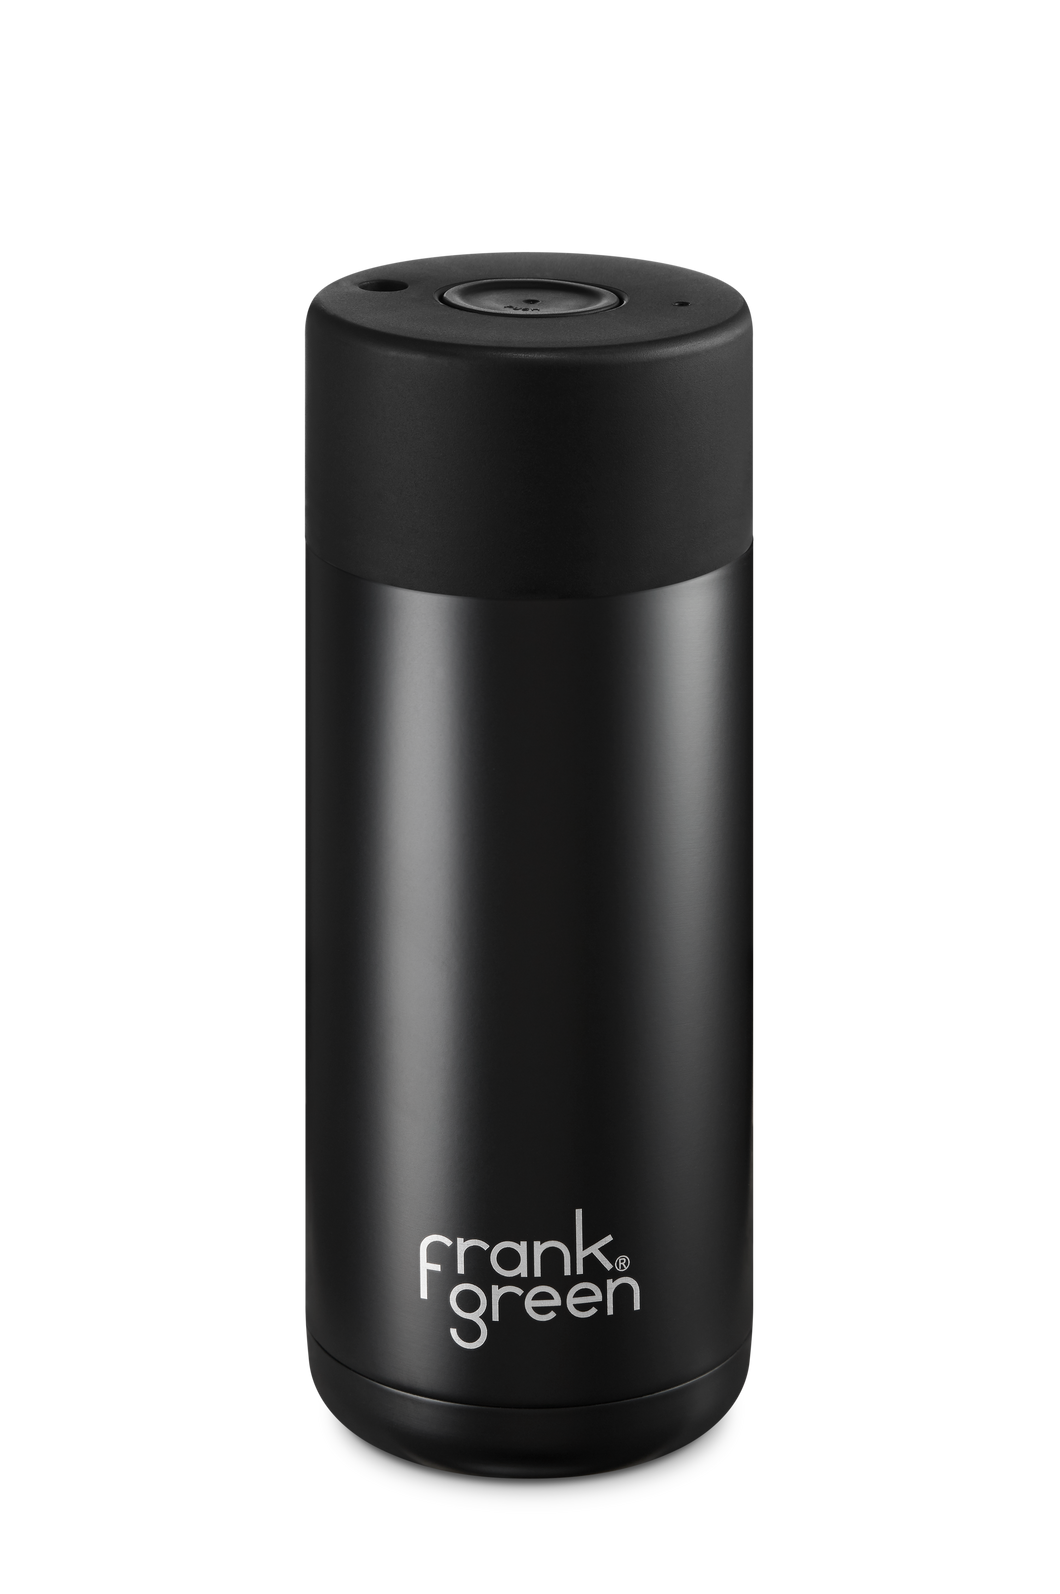 Frank Green Ceramic Reusable Bottle with Push Button Lid 475ml (16oz) - Midnight Black